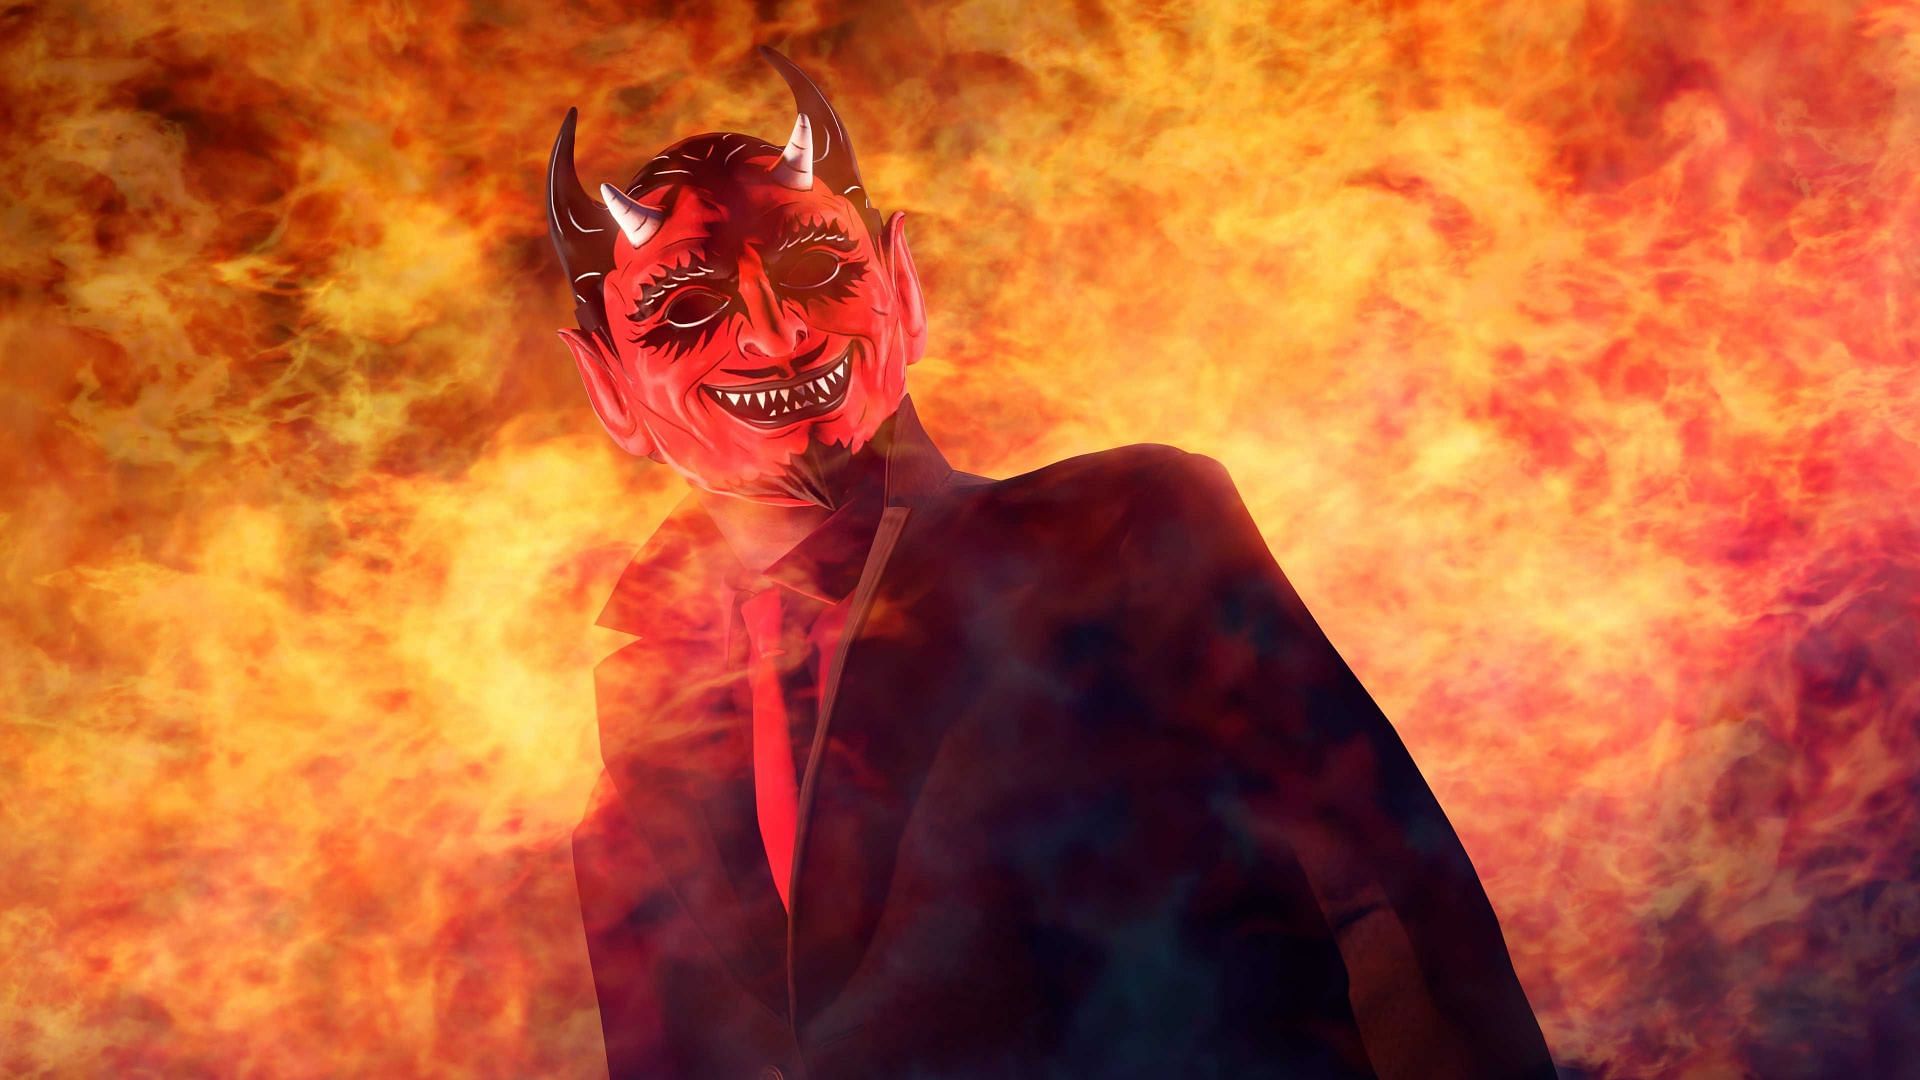 This is the free mask you get by logging in this week (Image via Rockstar Games)